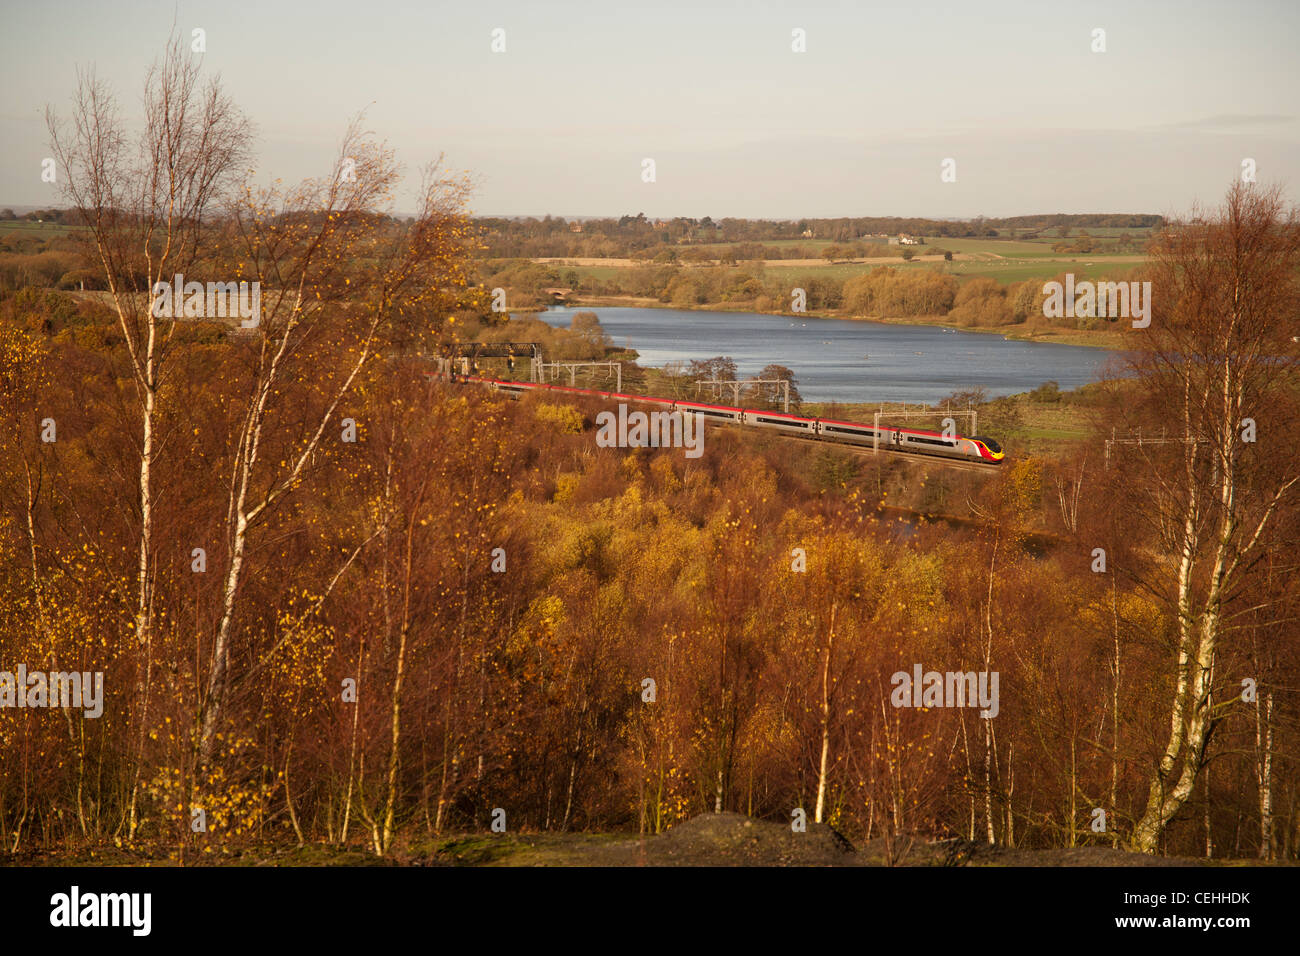 Virgin Trains Pendolino from atop Pooley Hall country park, Polesworth, Warwickshire. Stock Photo